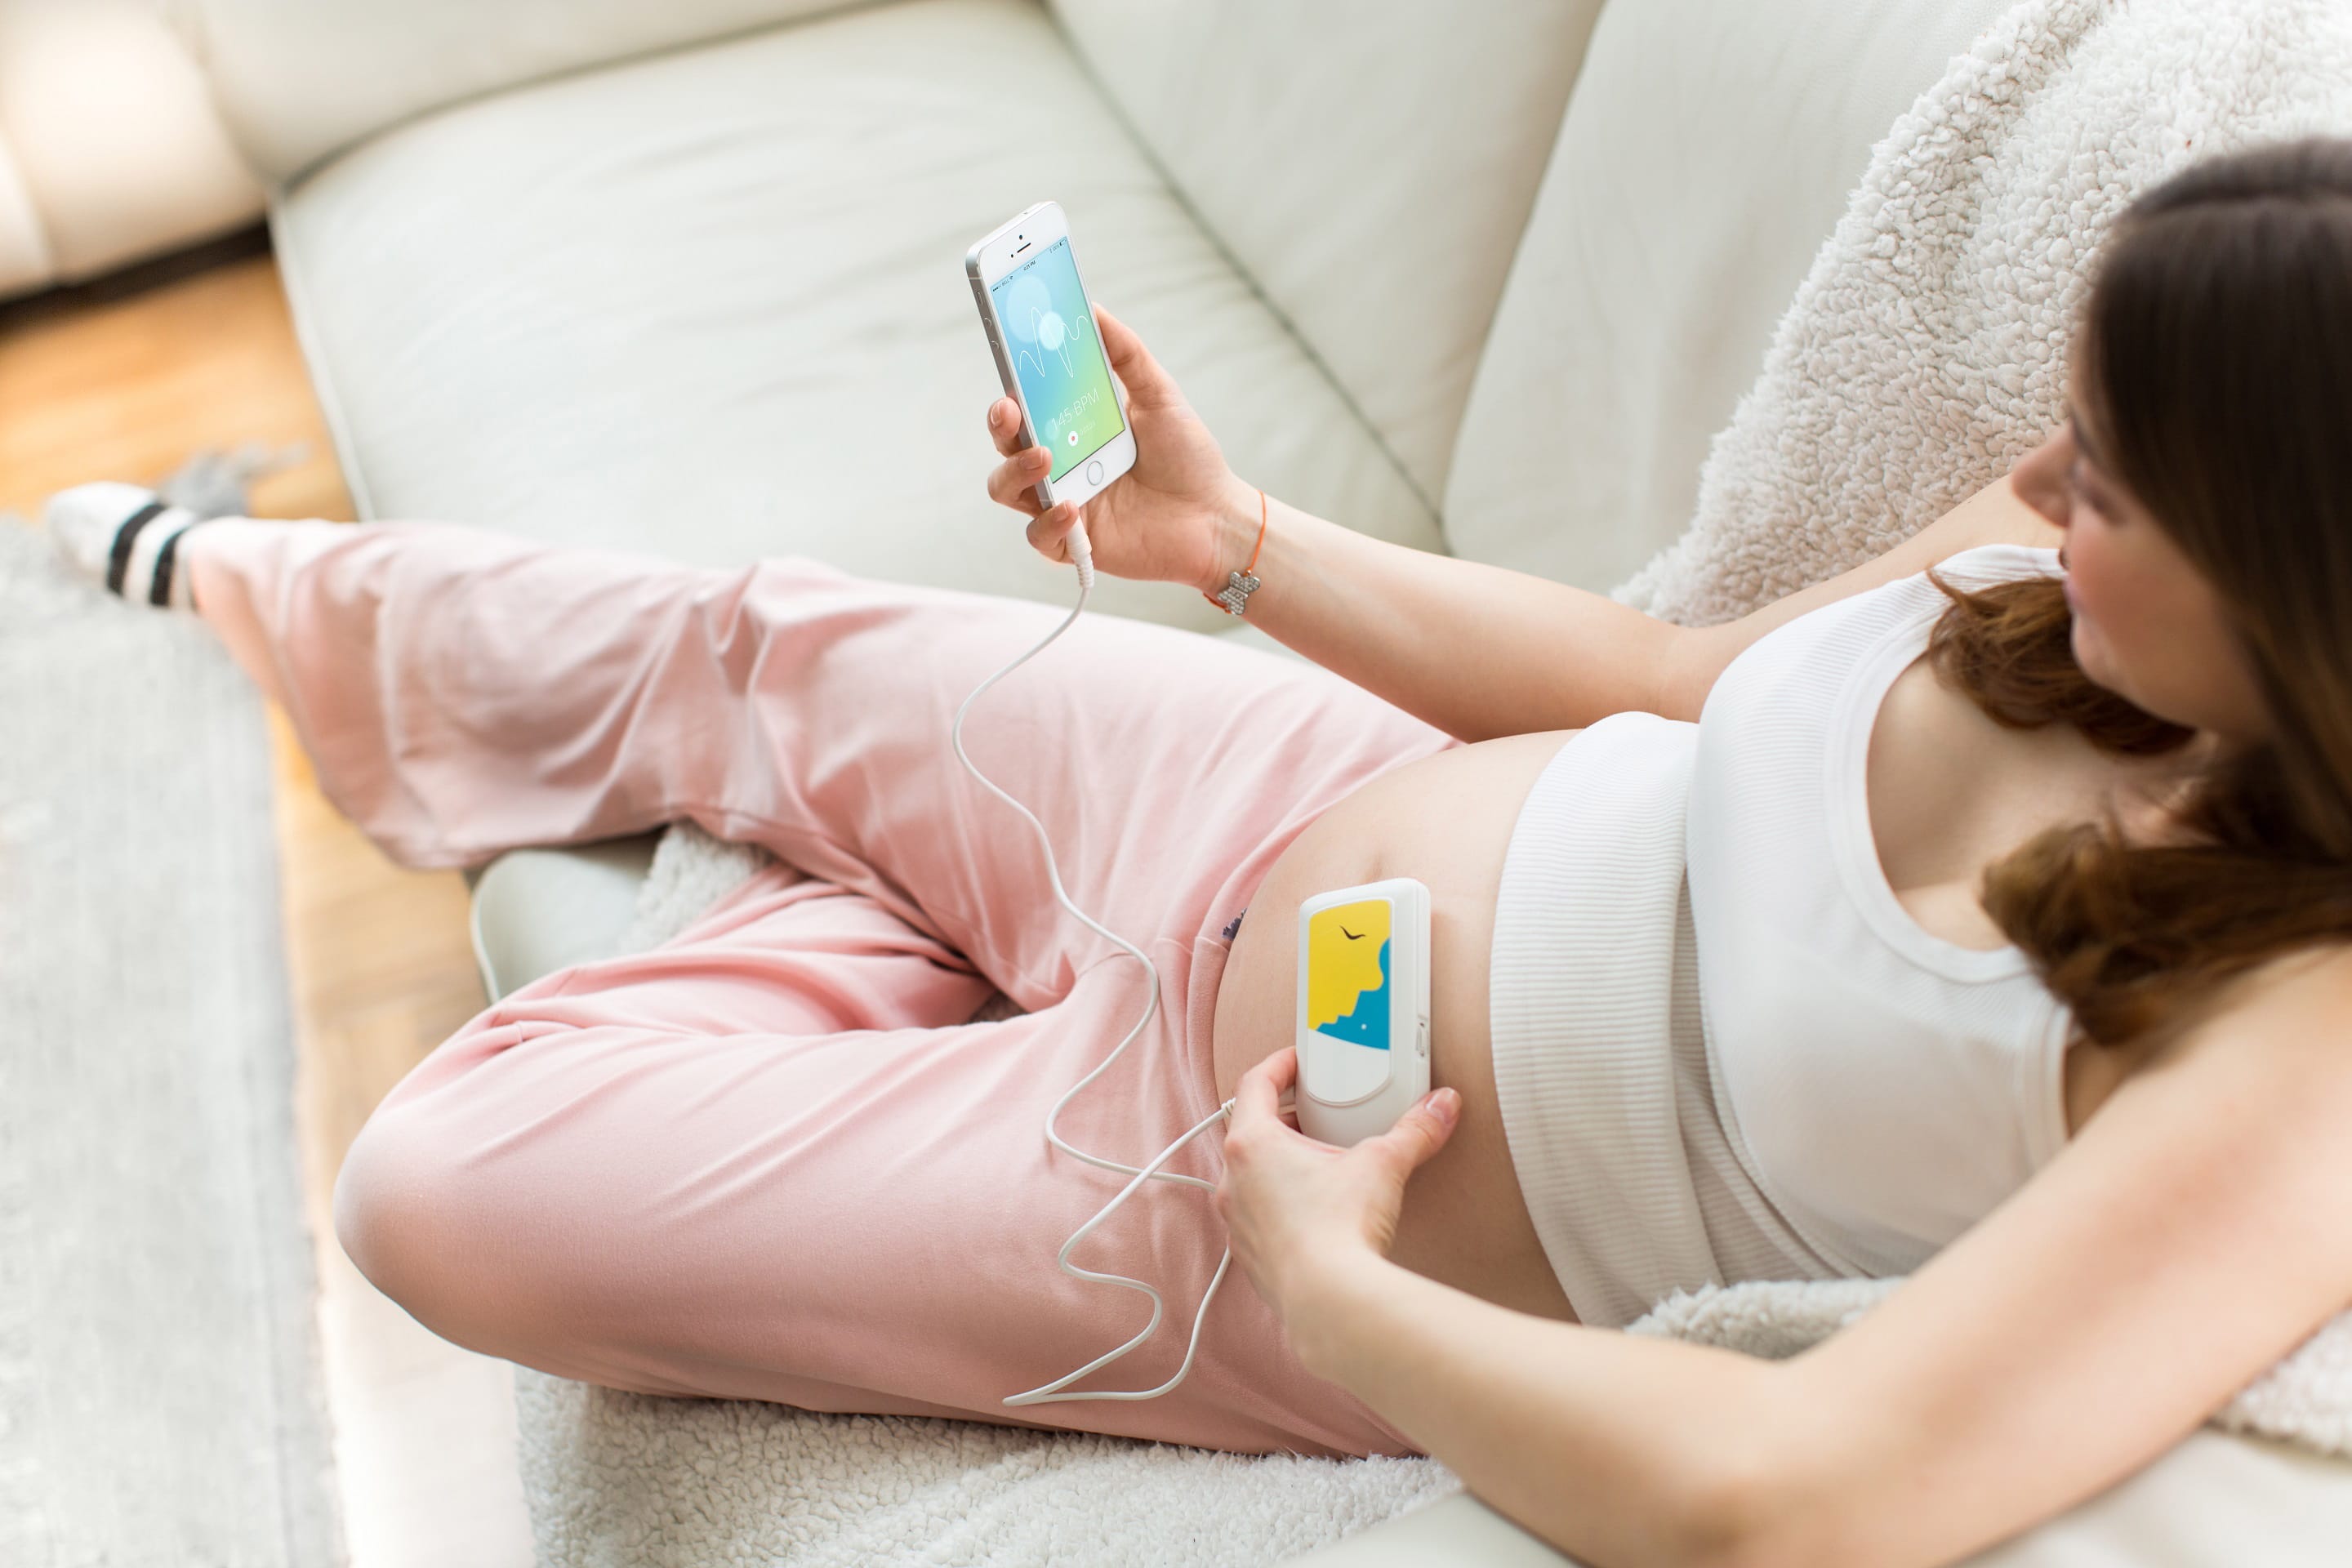 Bellabeat
The Bellabeat fetal heart listening system, available for $129, is plugged into your smartphone's headphone port, then a set of earbuds is plugged into the device. The companion smartphone app tracks the baby's heart rate and lets you record the sound.